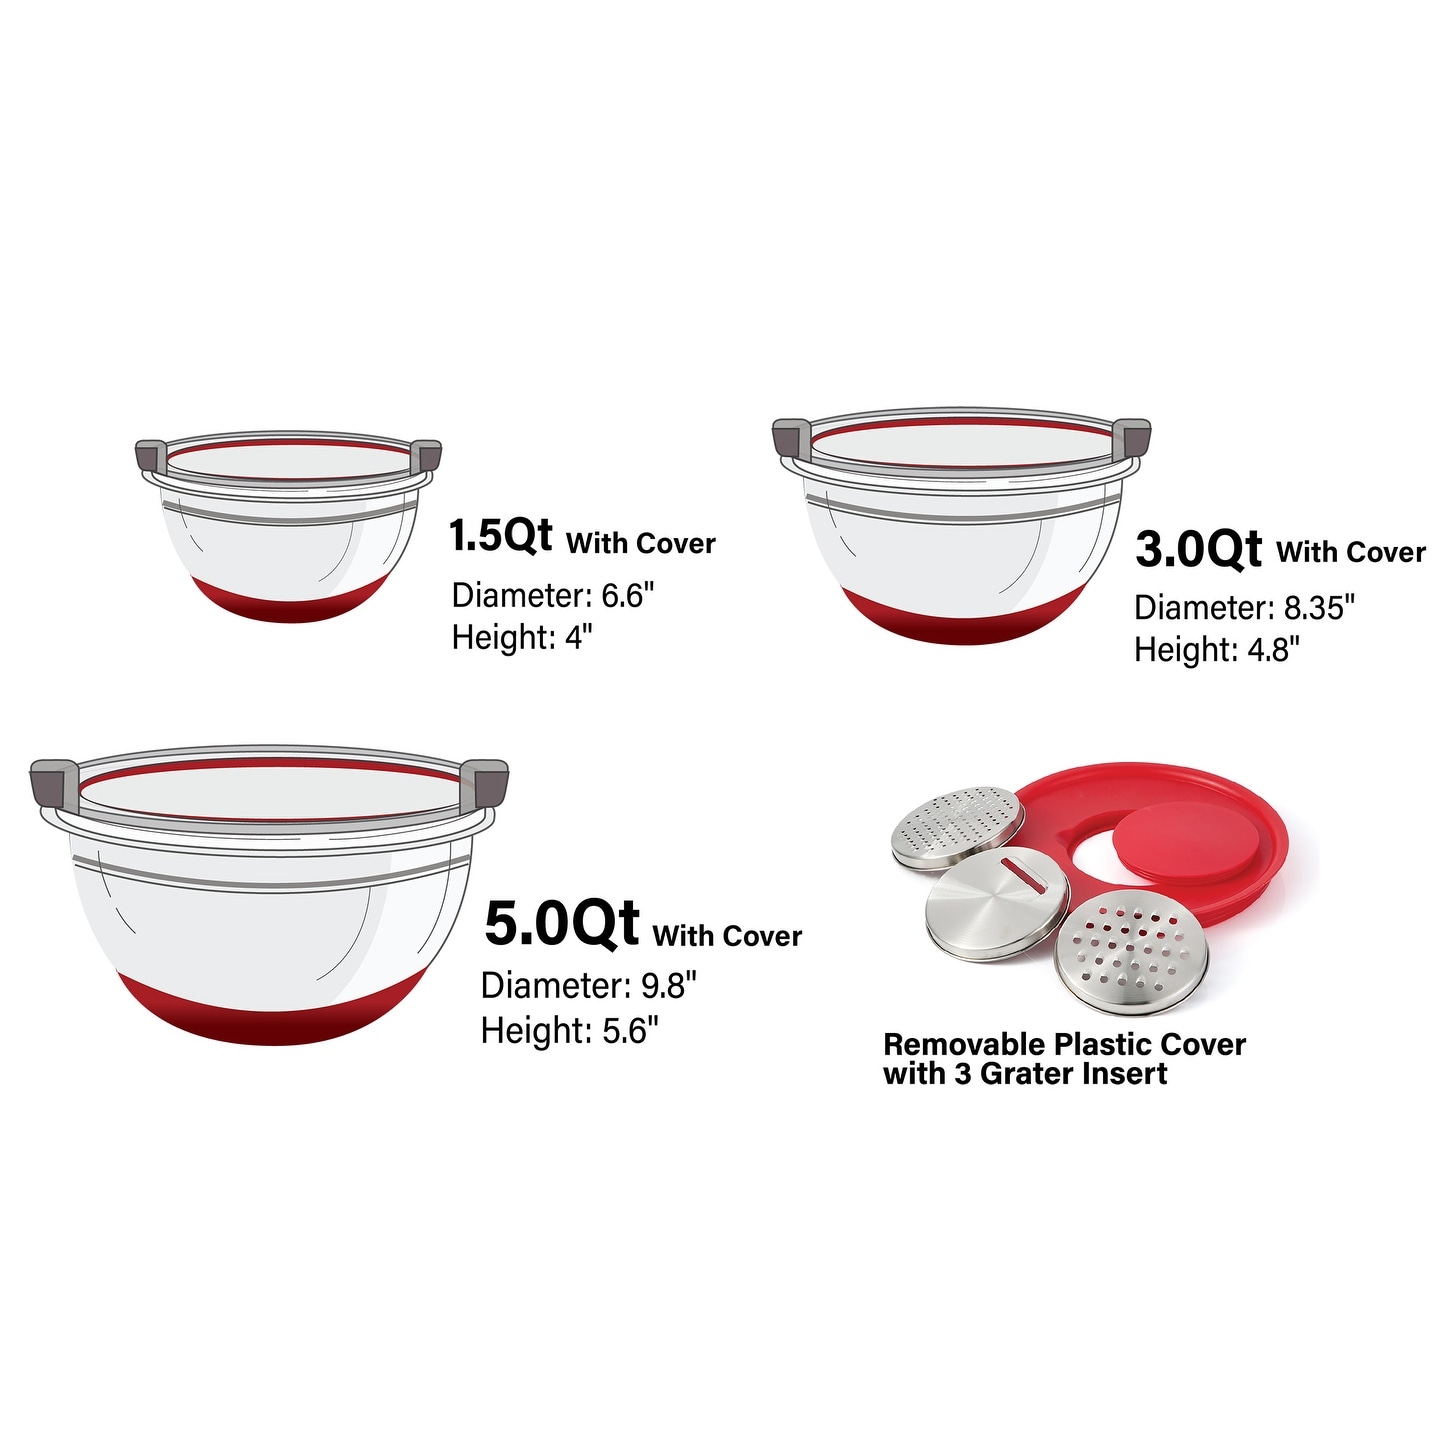 https://ak1.ostkcdn.com/images/products/is/images/direct/e102480d485976af36164bd31b73bd6a35d65f19/Gourmet-Edge-10pc-Stainless-Steel-Mixing-Bowl-Set.jpg